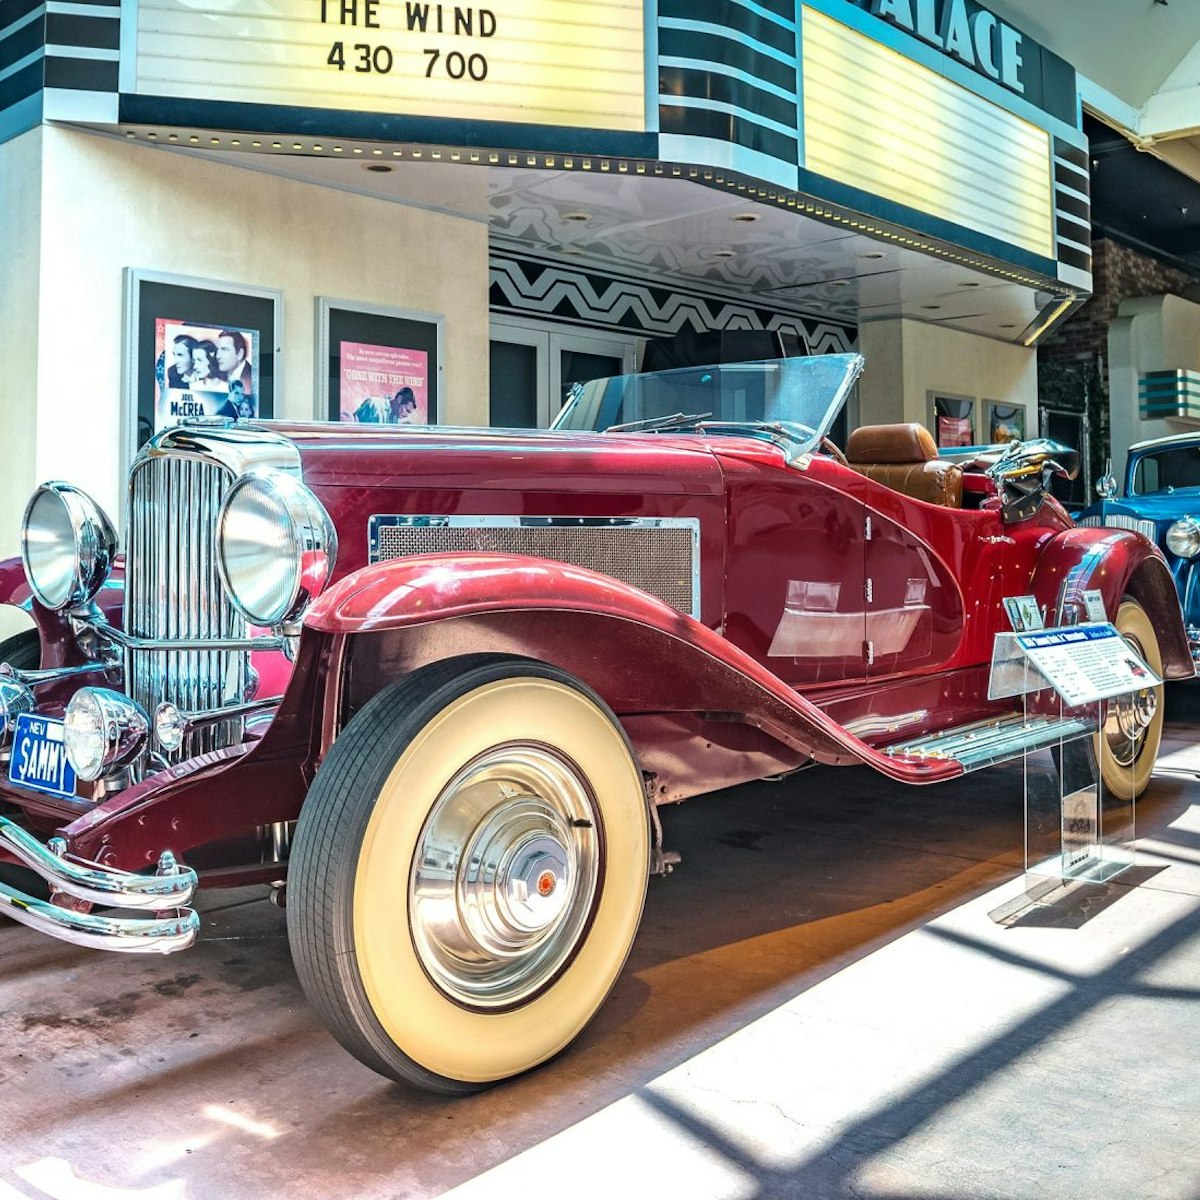 Reno, Nevada - July 18, 2016: Vintage cars in the National Automobile Museum, Reno, Nevada, USA.